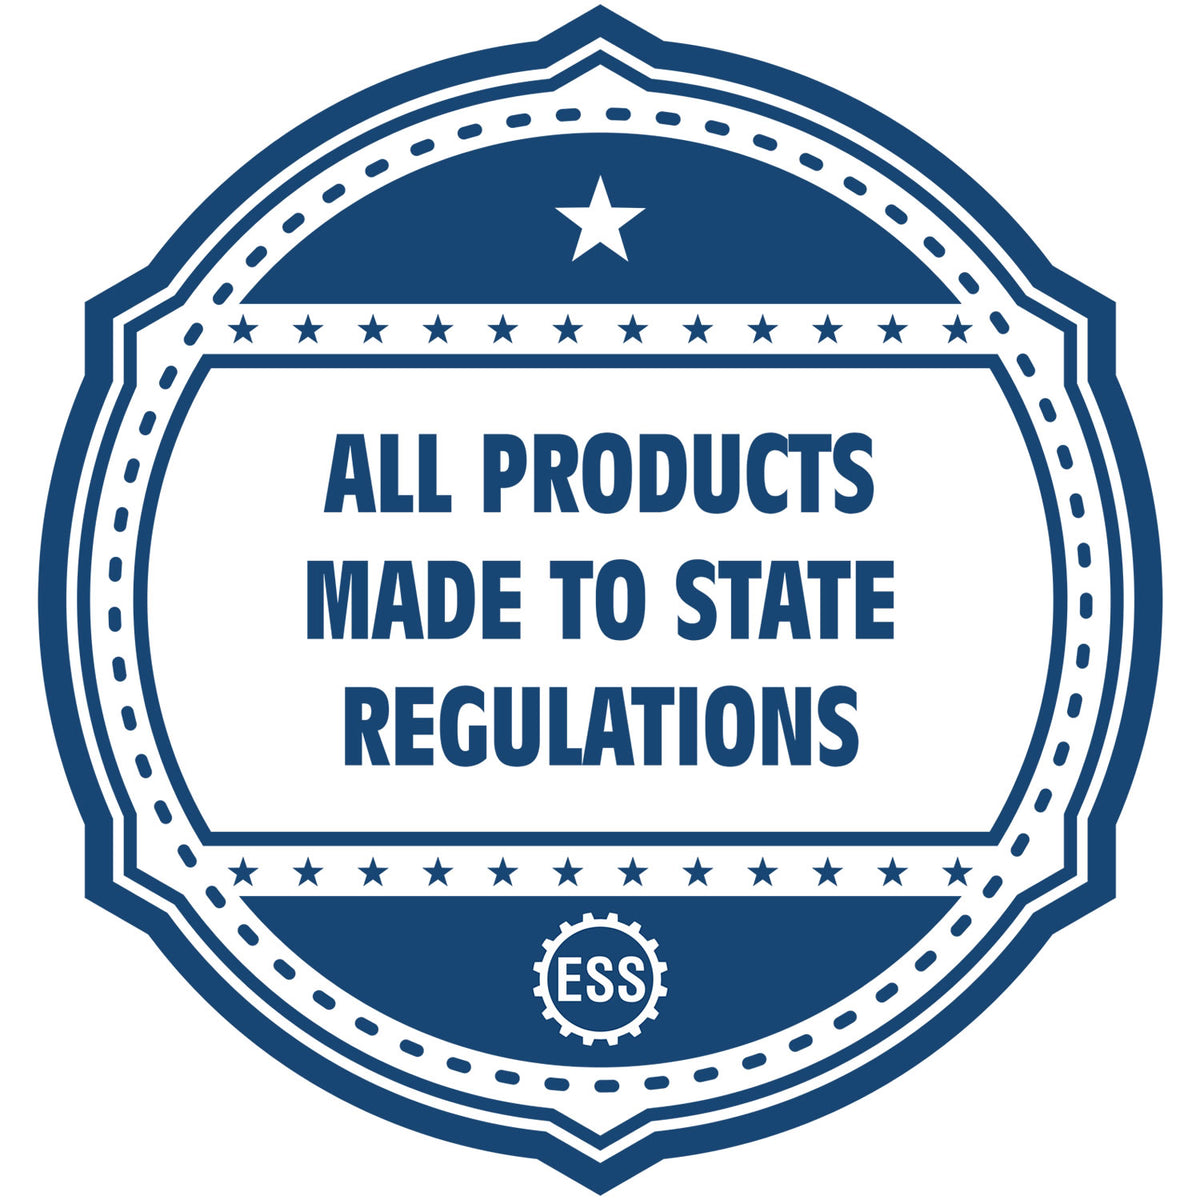 An icon or badge element for the MaxLight Premium Pre-Inked Louisiana State Seal Notarial Stamp showing that this product is made in compliance with state regulations.